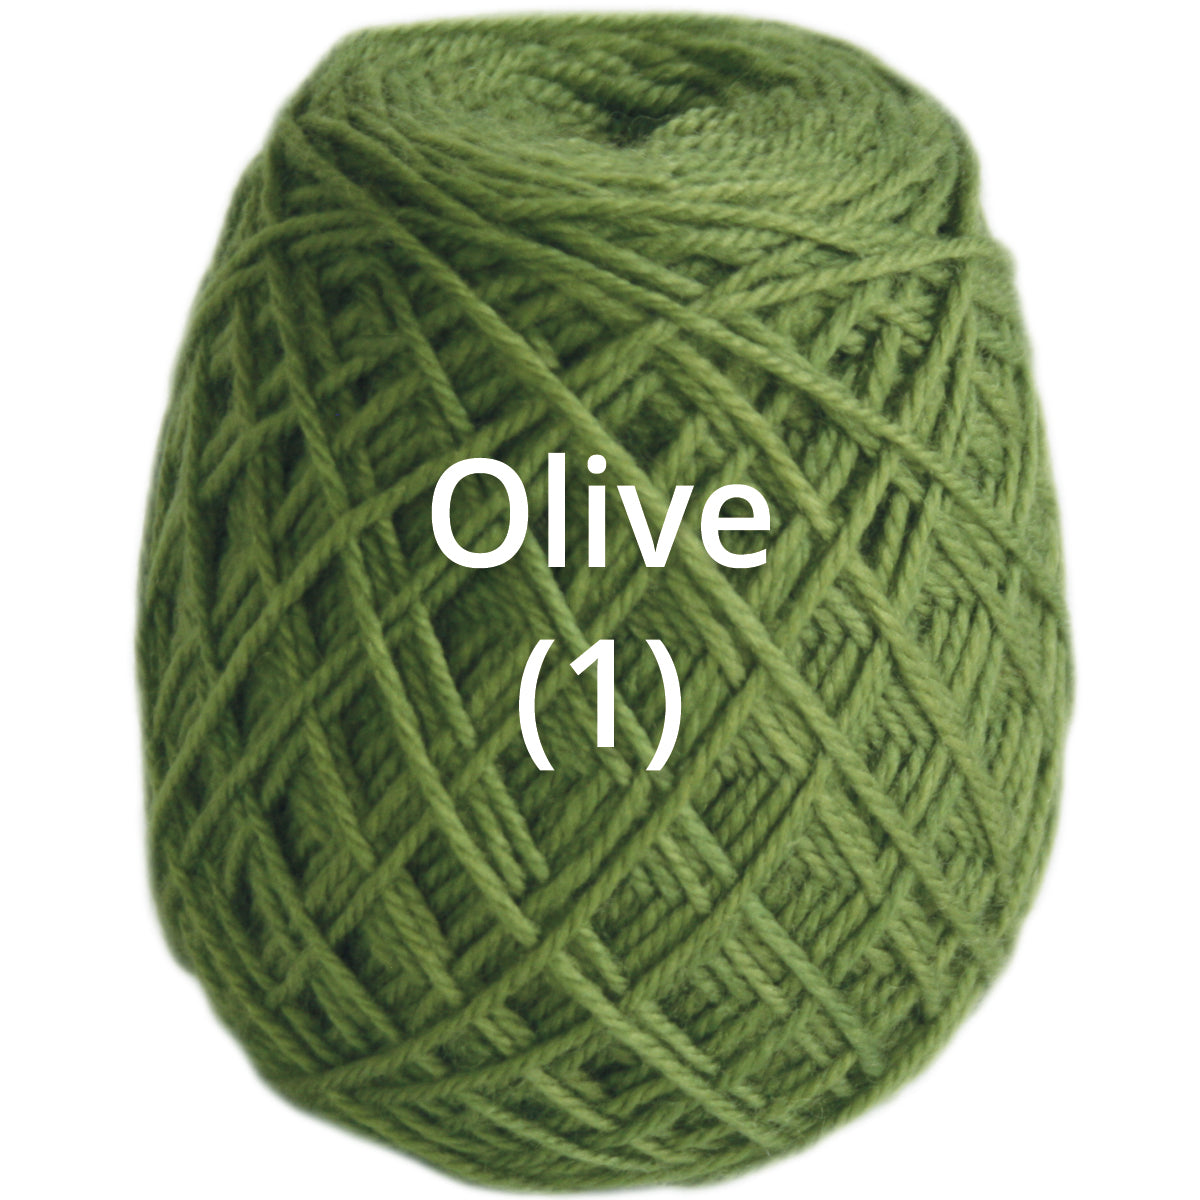 Olive - Nundle Collection 4 Ply Sock Yarn